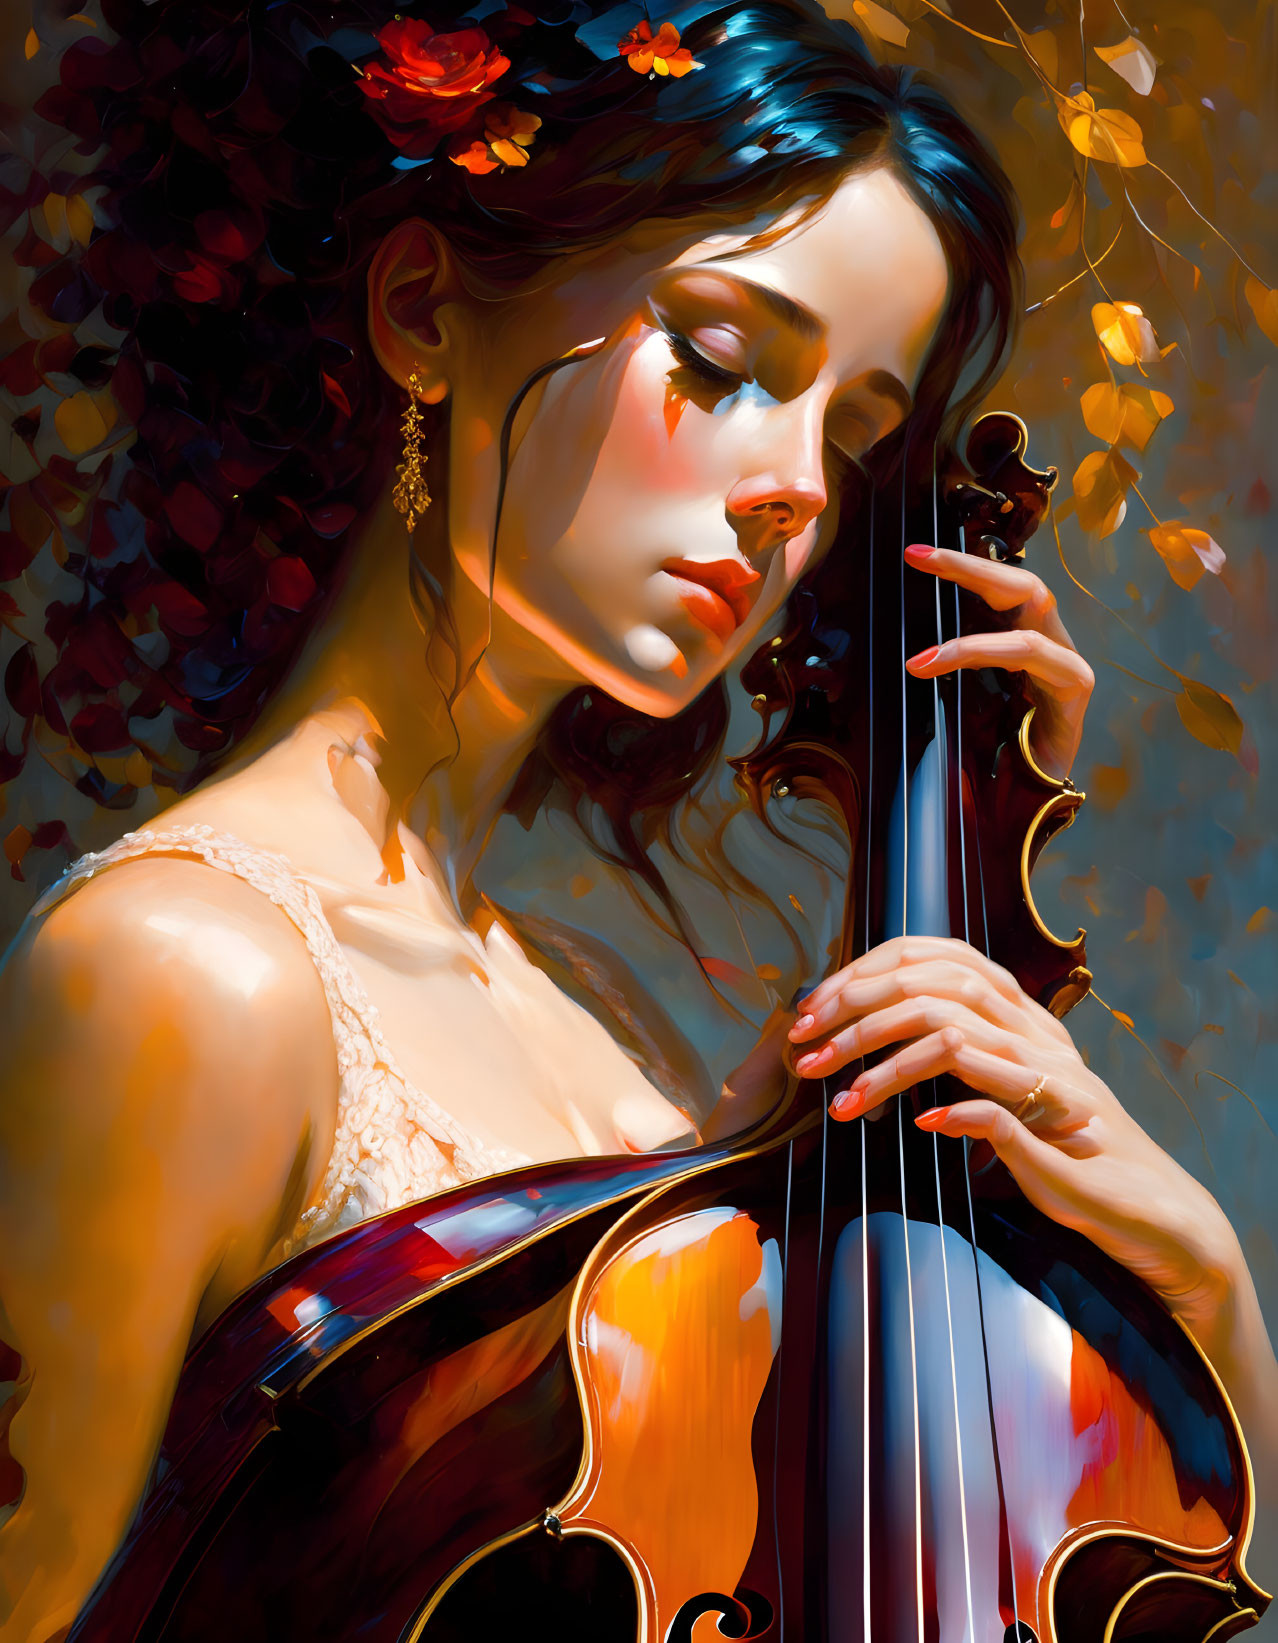 Woman with Dark Hair and Flowers Holding Cello Against Vibrant Background